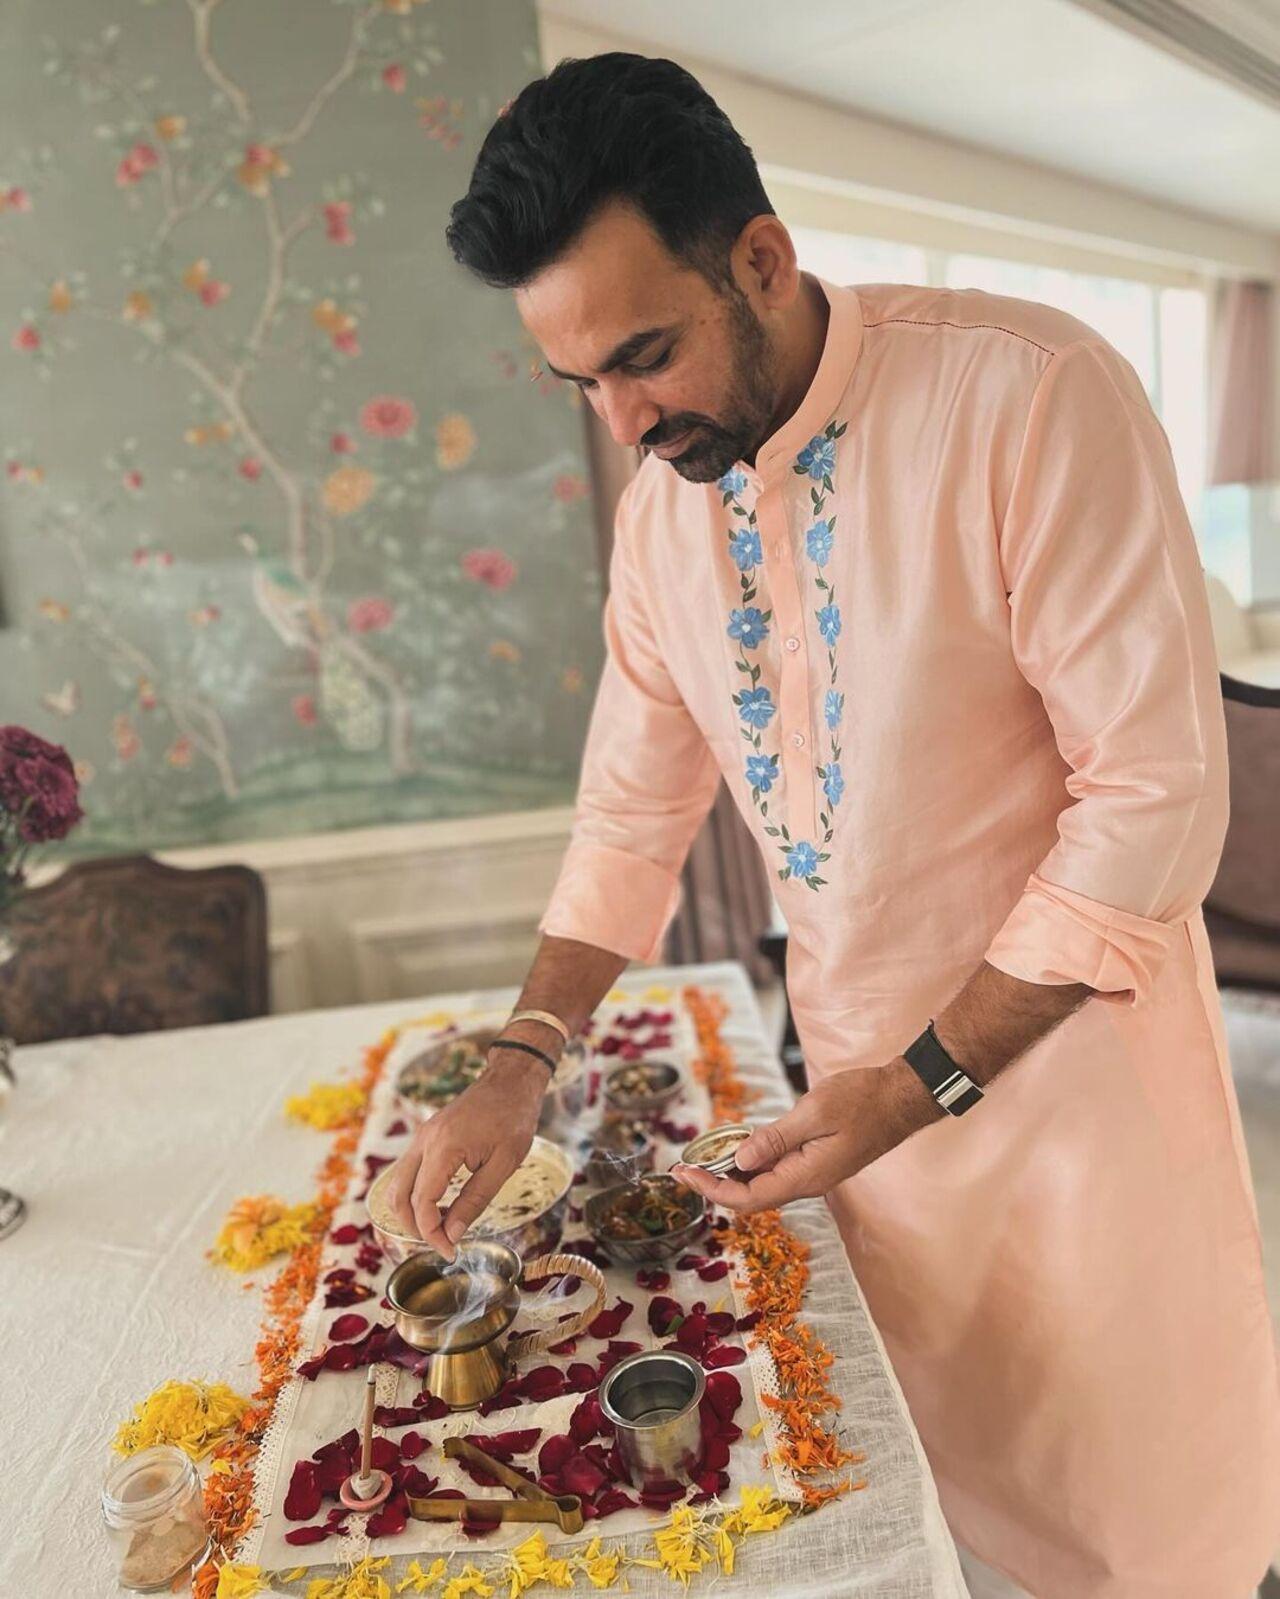 Dressed in traditionals, the couple shared pictures from their celebration at home